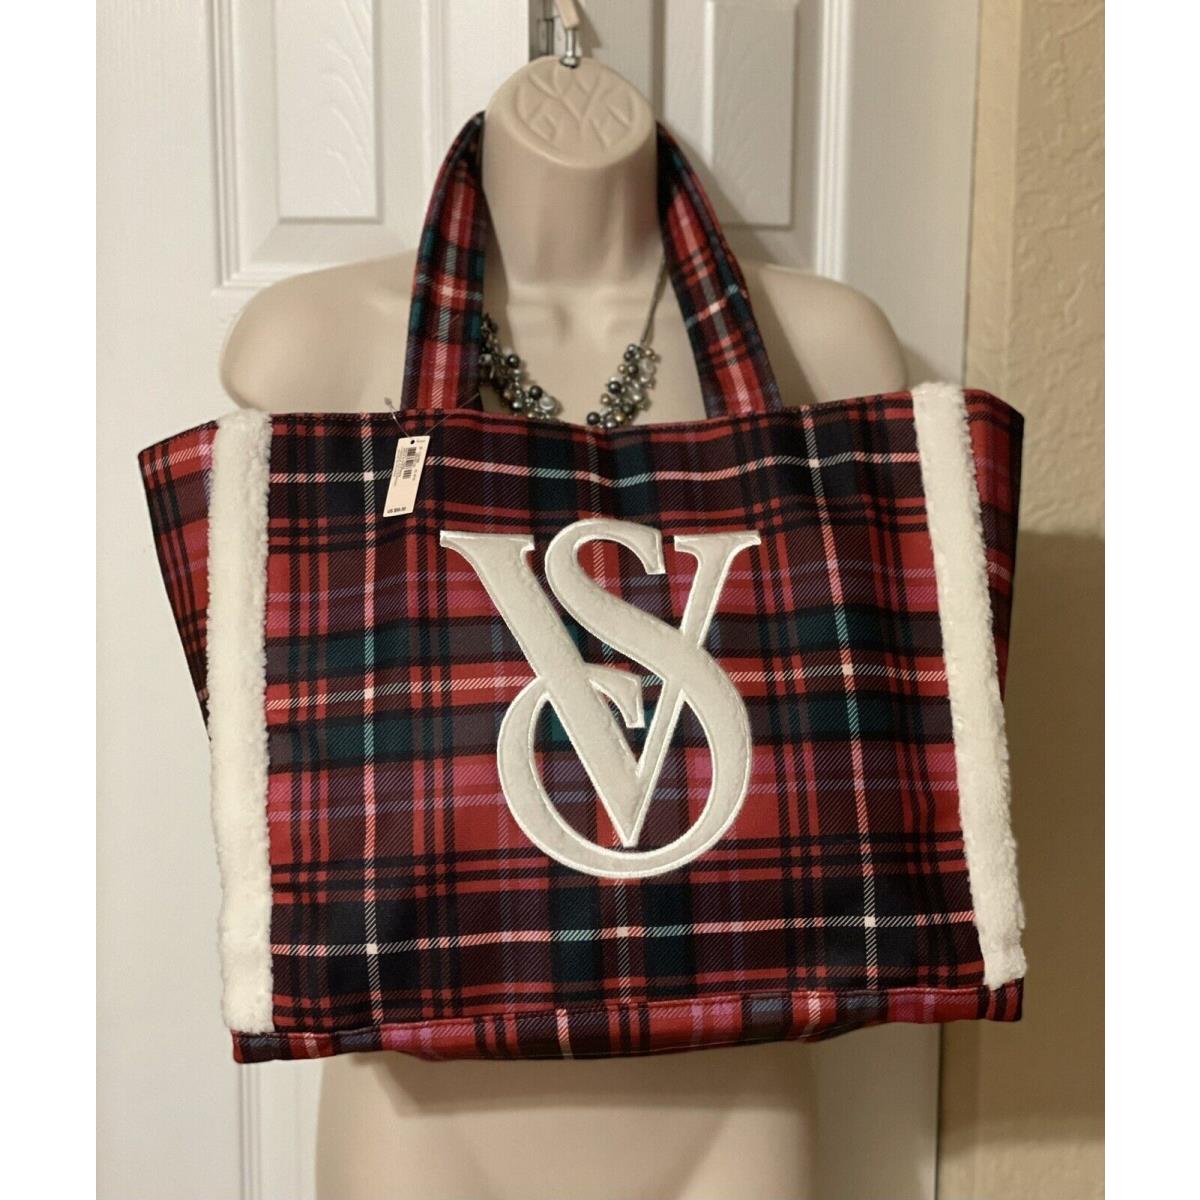 Victoria’s Secret Tote Bag Black Friday 2021 Tote Duffle Bag In Red Plaid  hg7